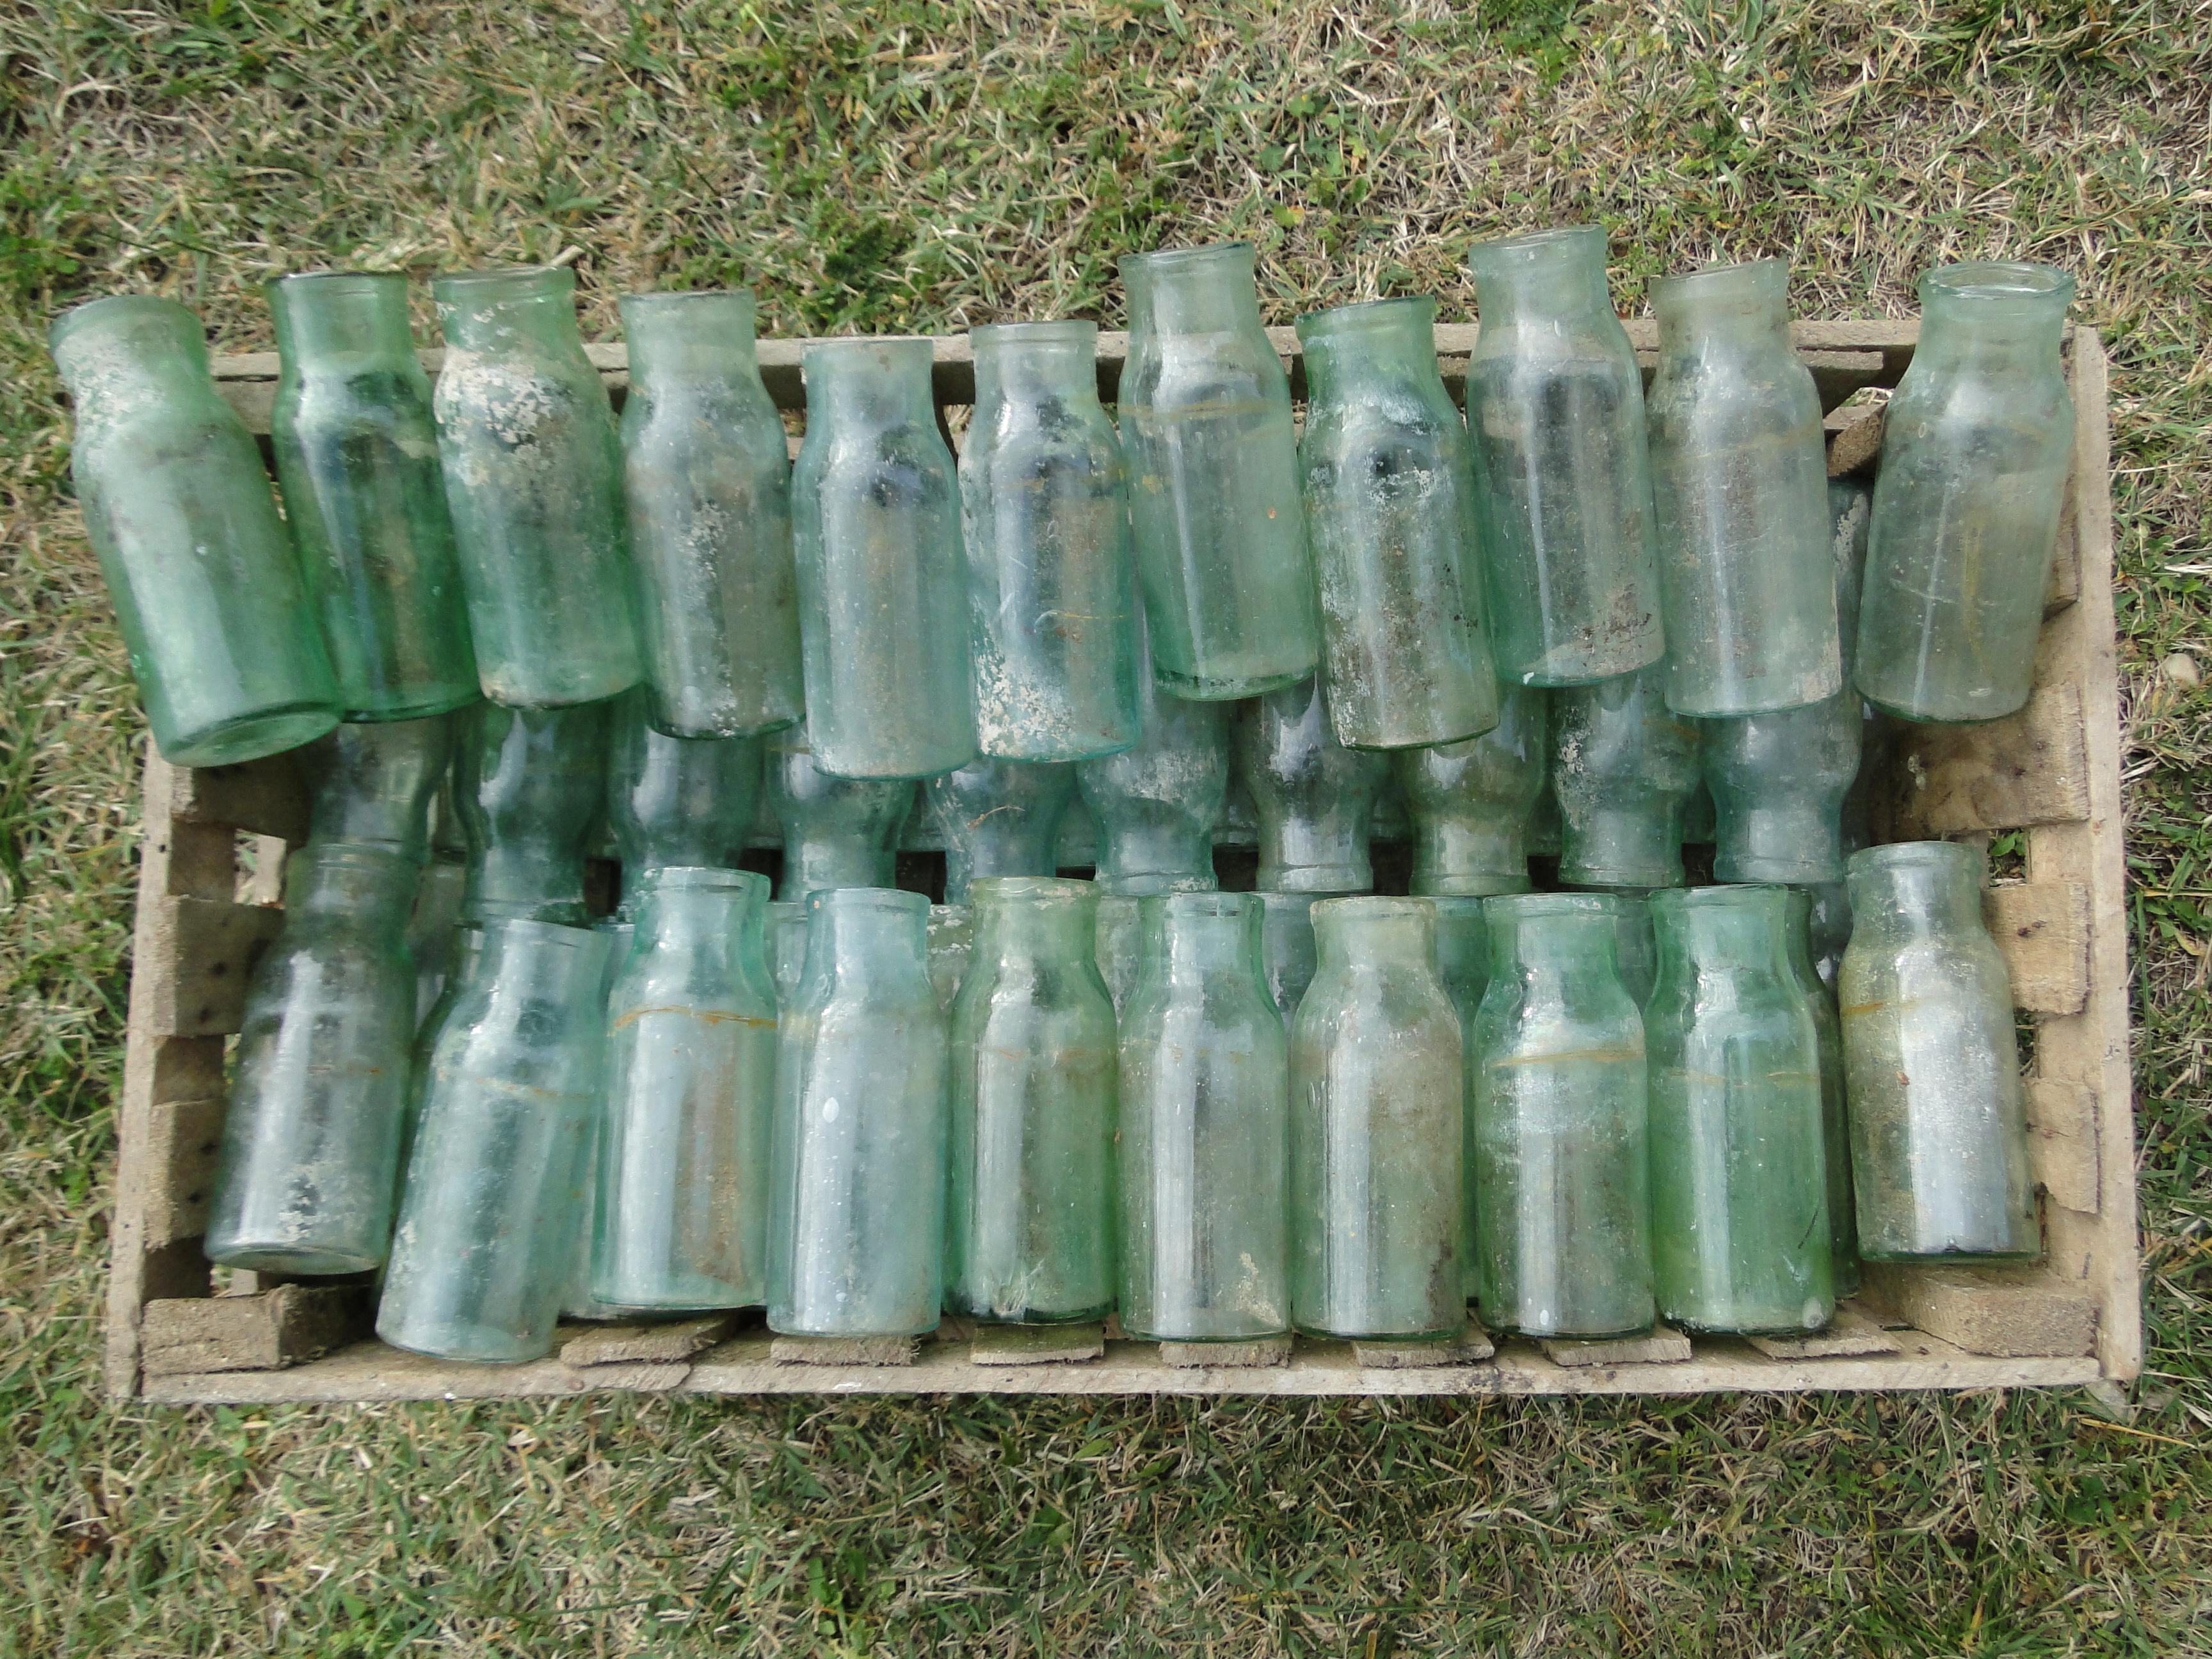 Lot of 10 blown glass bottles from a 19th century grape chamber Thomery Moissac


Lot of 10 blown glass bottles from the 19th century from Moissac Tarn et Garonne.

Height 5.11 in ø 1.57 in and 1.96 in



These adorable bottles were used to